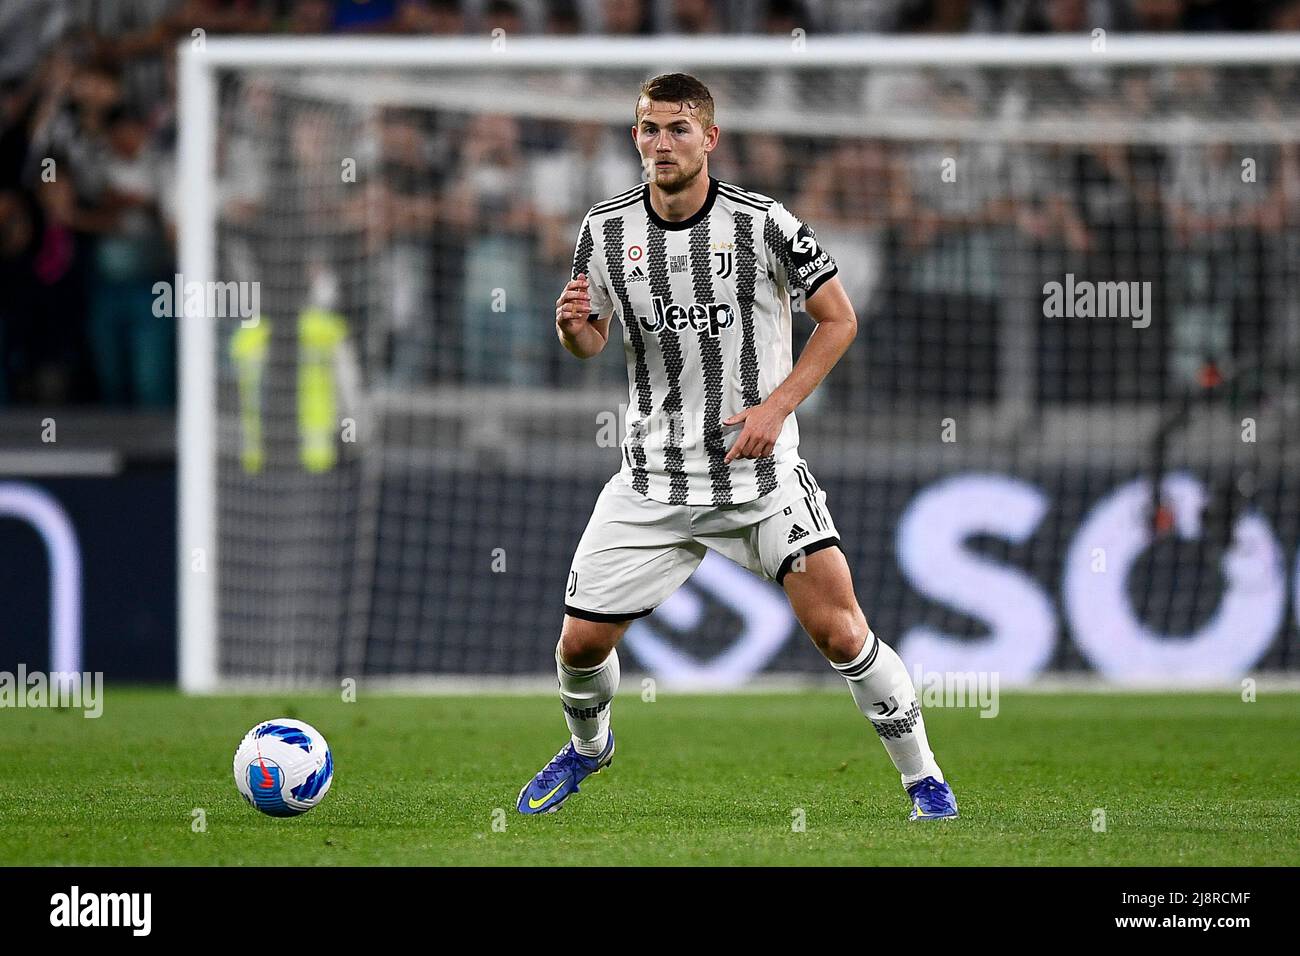 Turin, Italy. 16 May 2022. Matthijs de Ligt of Juventus FC in action during  the Serie